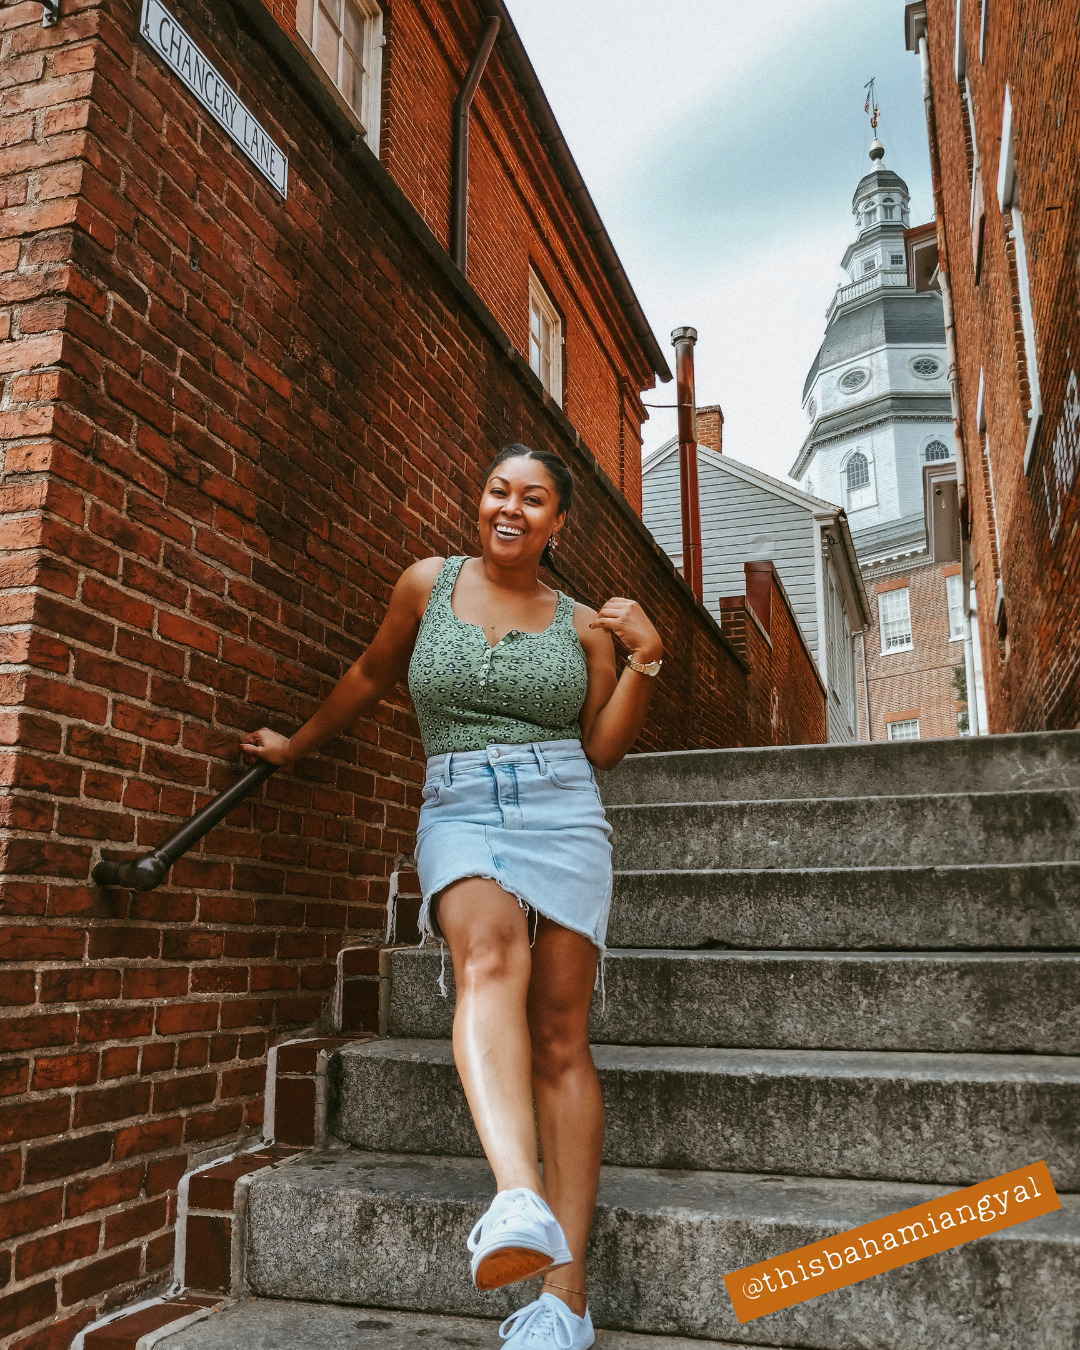 DC blogger Rogan Smith poses on steps in Annapolis Maryland